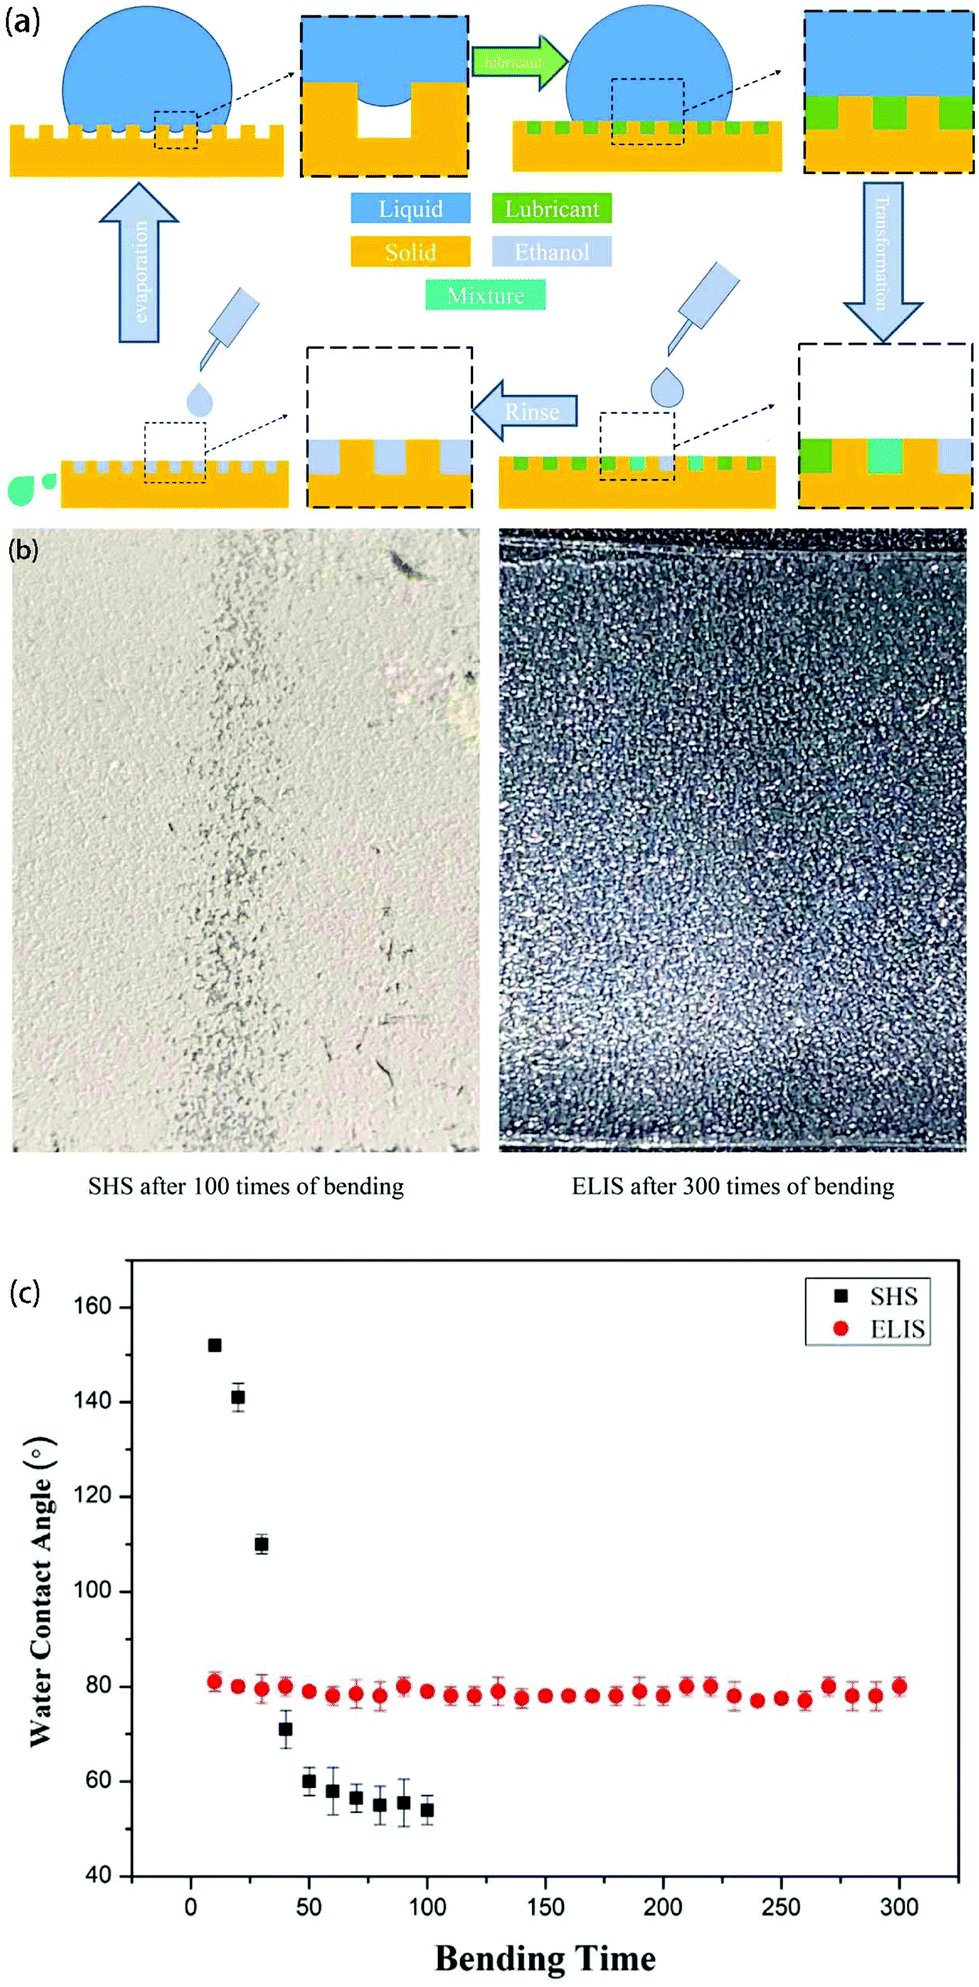 A Comparison Between Superhydrophobic Surfaces Shs And Slippery Liquid Infused Porous Surfaces Slips In Application Nanoscale Rsc Publishing Doi 10 1039 D0nrg